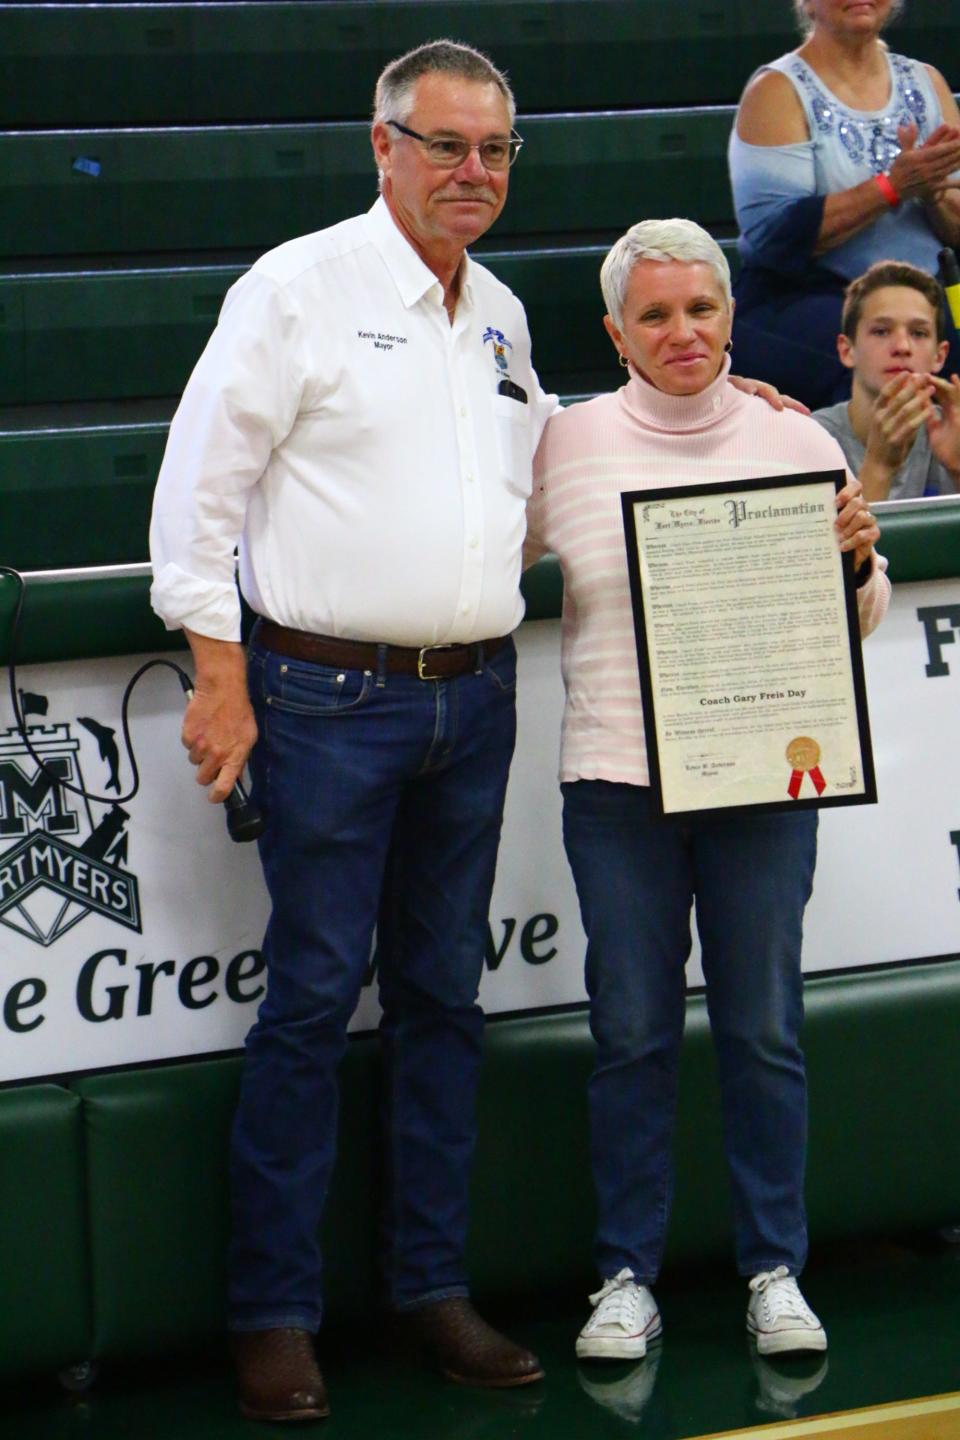 Kim Freis, the daughter of the late Coach Gary Freis, accepts the Proclamation on behalf of her father at the Gary Freis Duals held Saturday, Dec. 4 at Fort Myers High School.